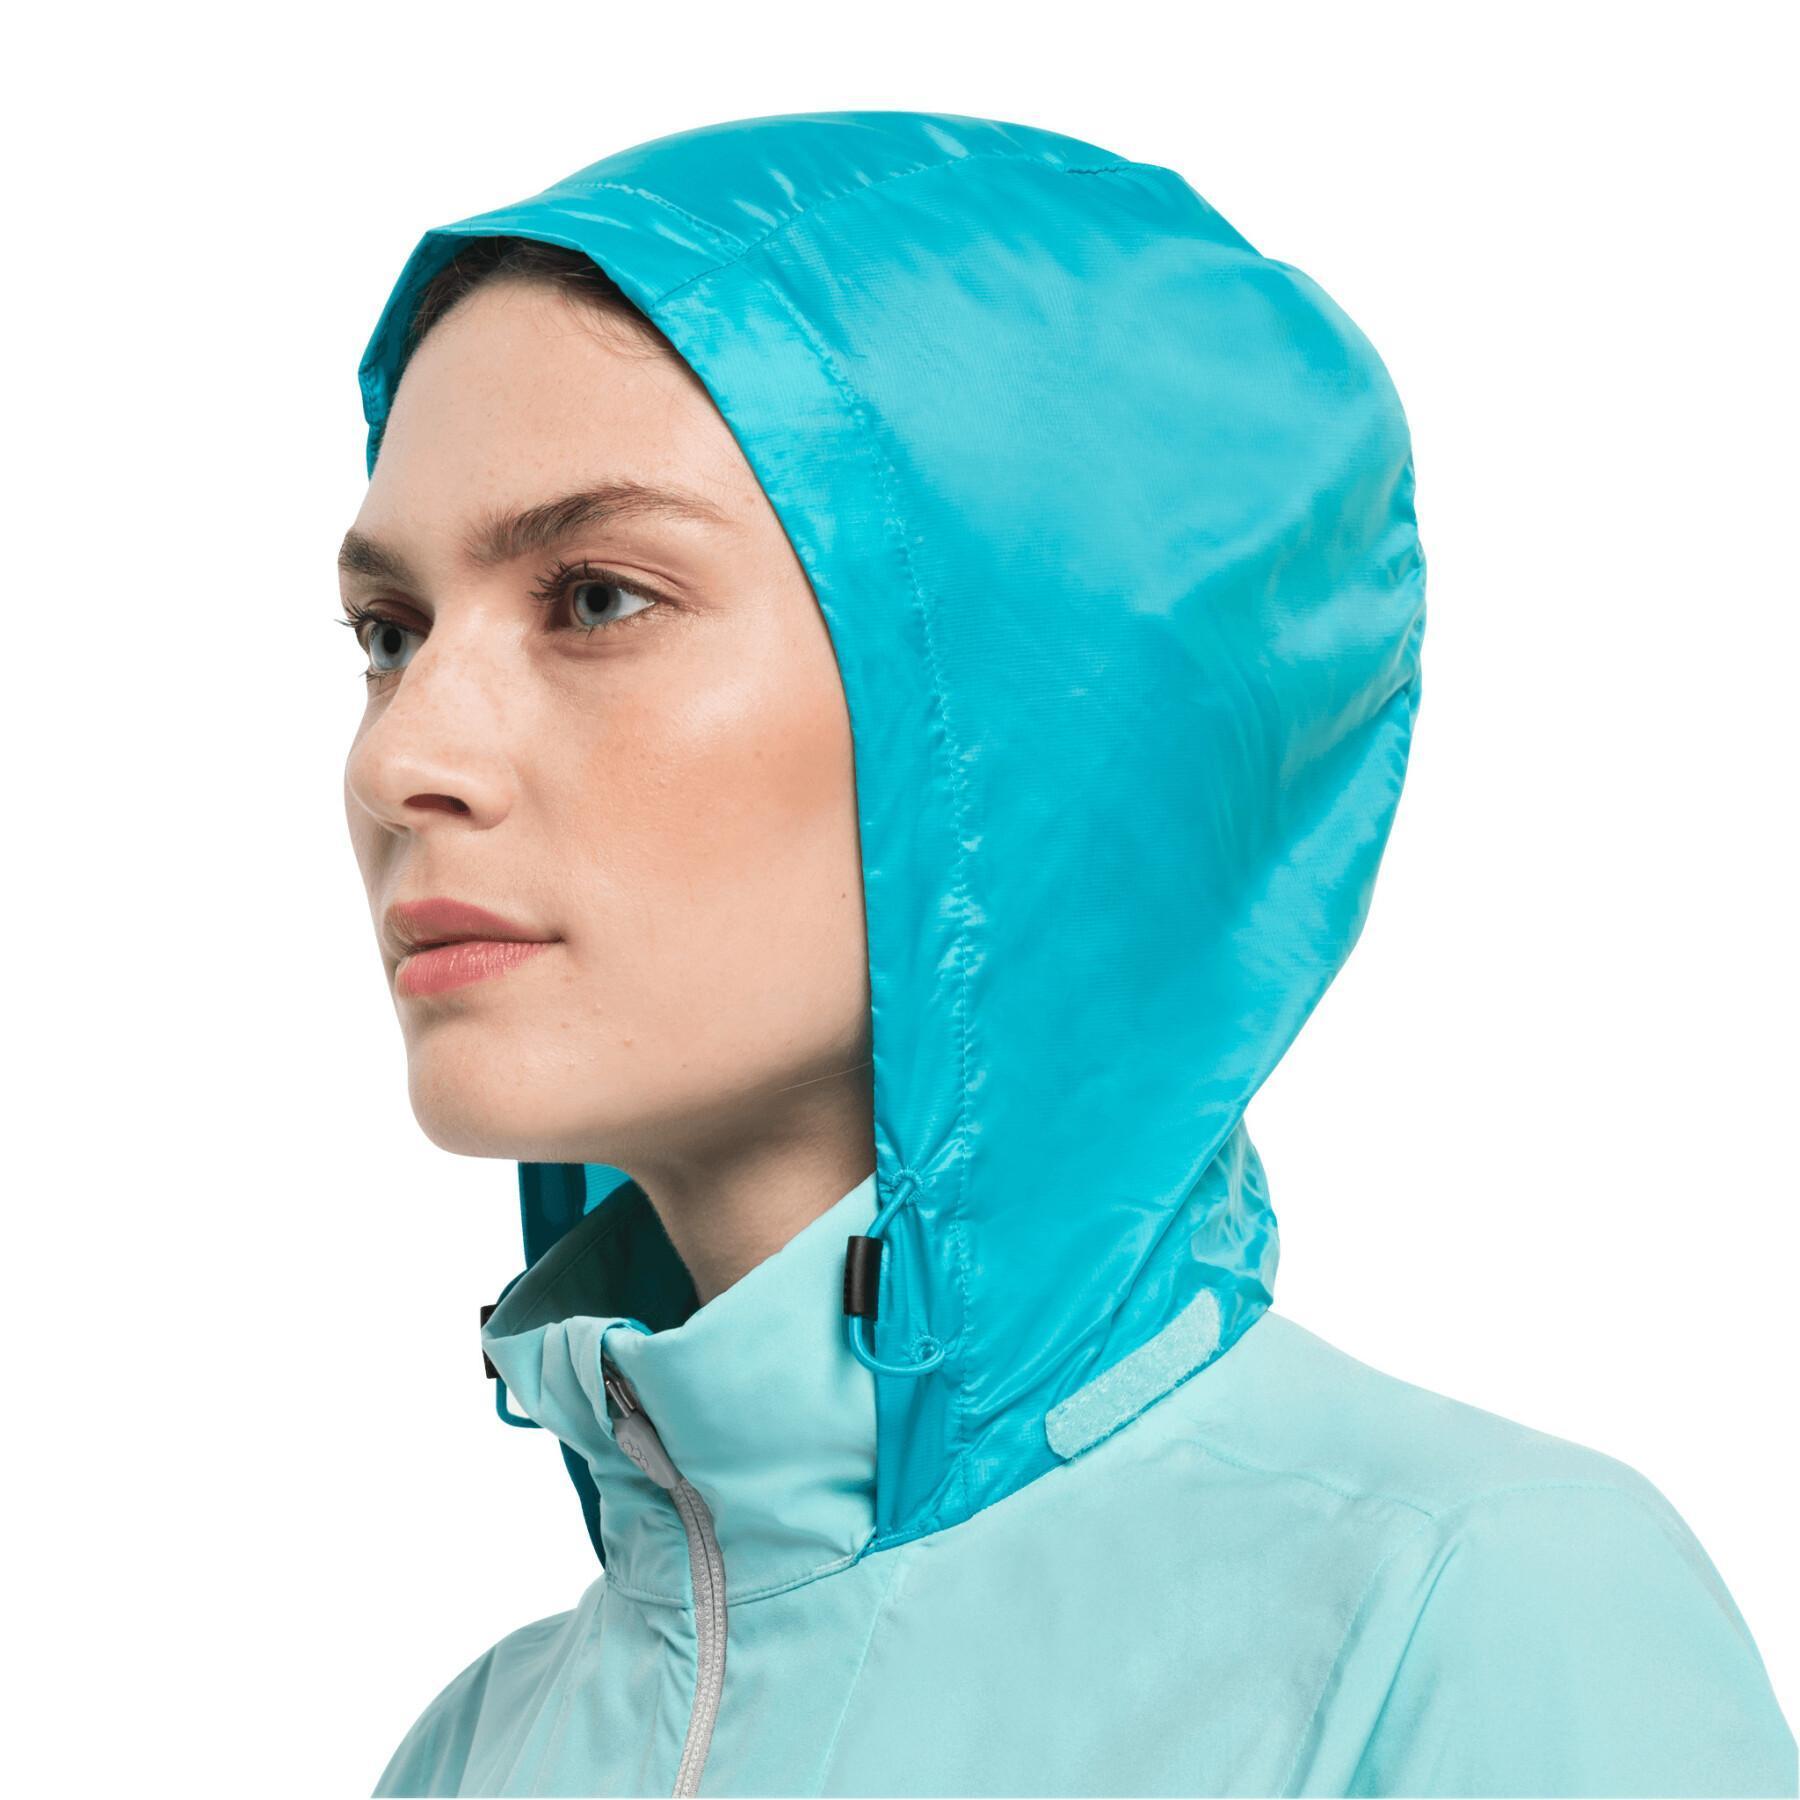 Chaqueta impermeable para mujer Jack Wolfskin Tourer 2.5L